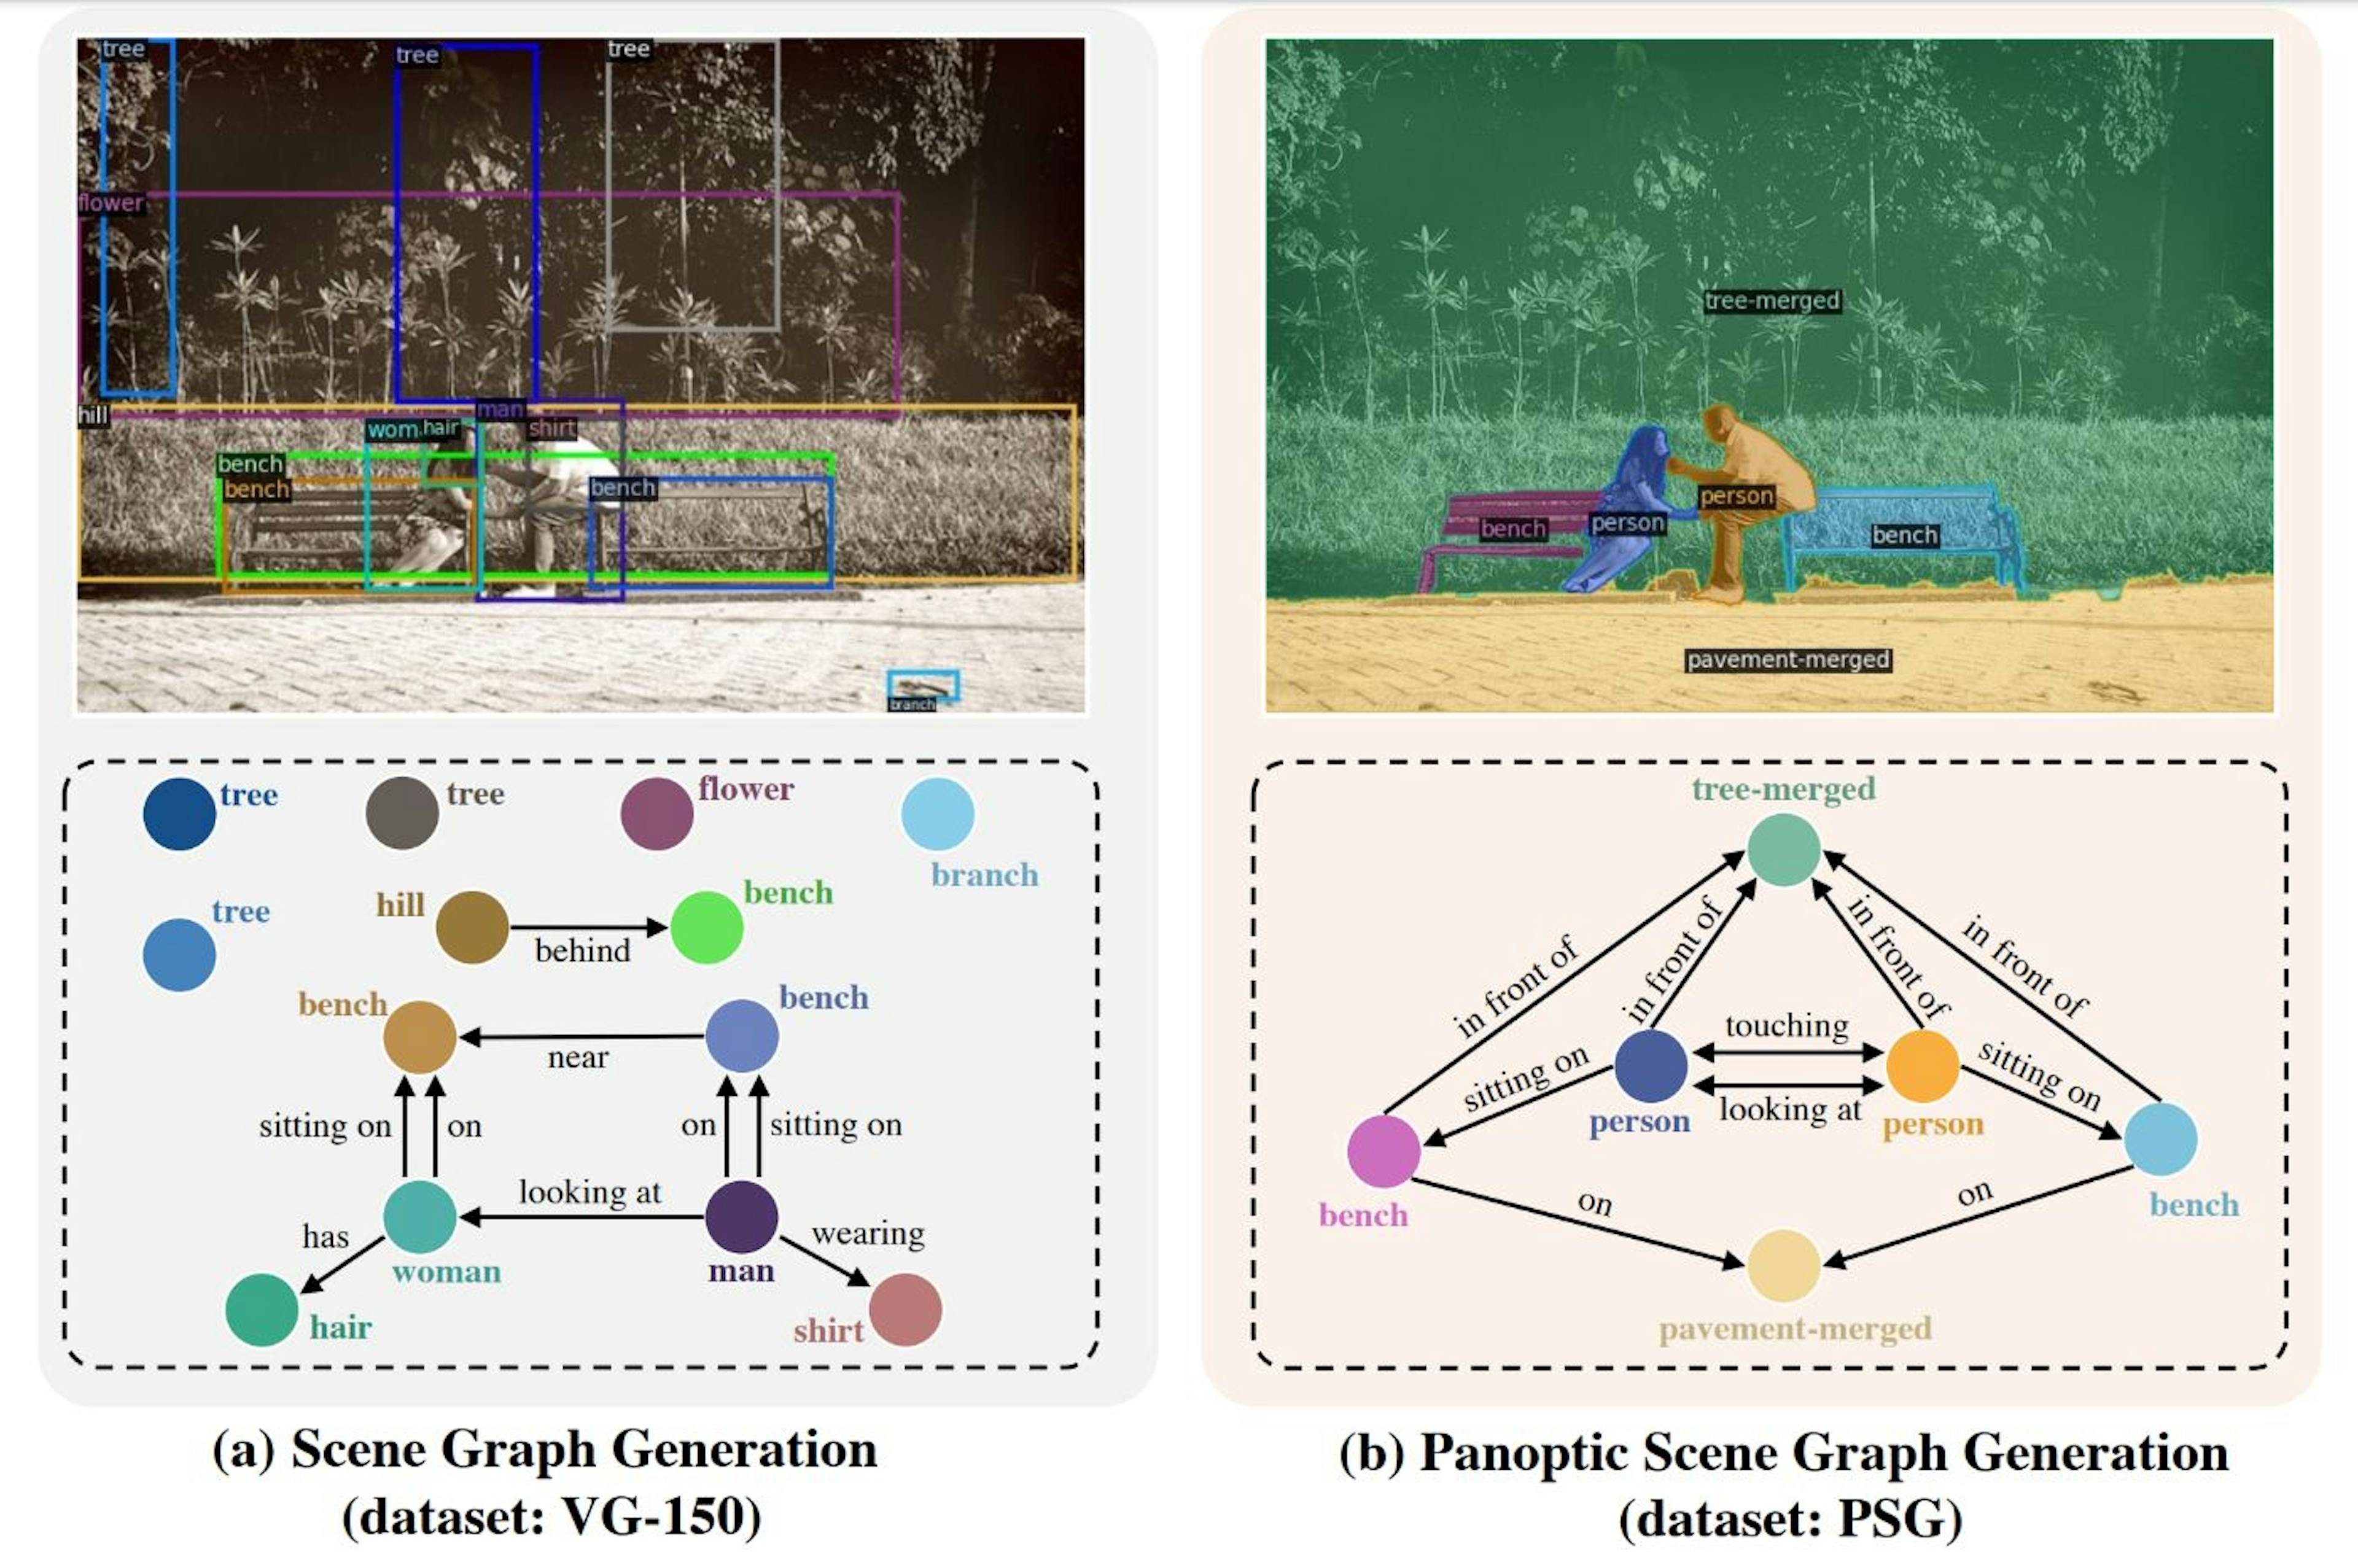 Figure from the paper “Panoptic Scene Graph Generation”[1].